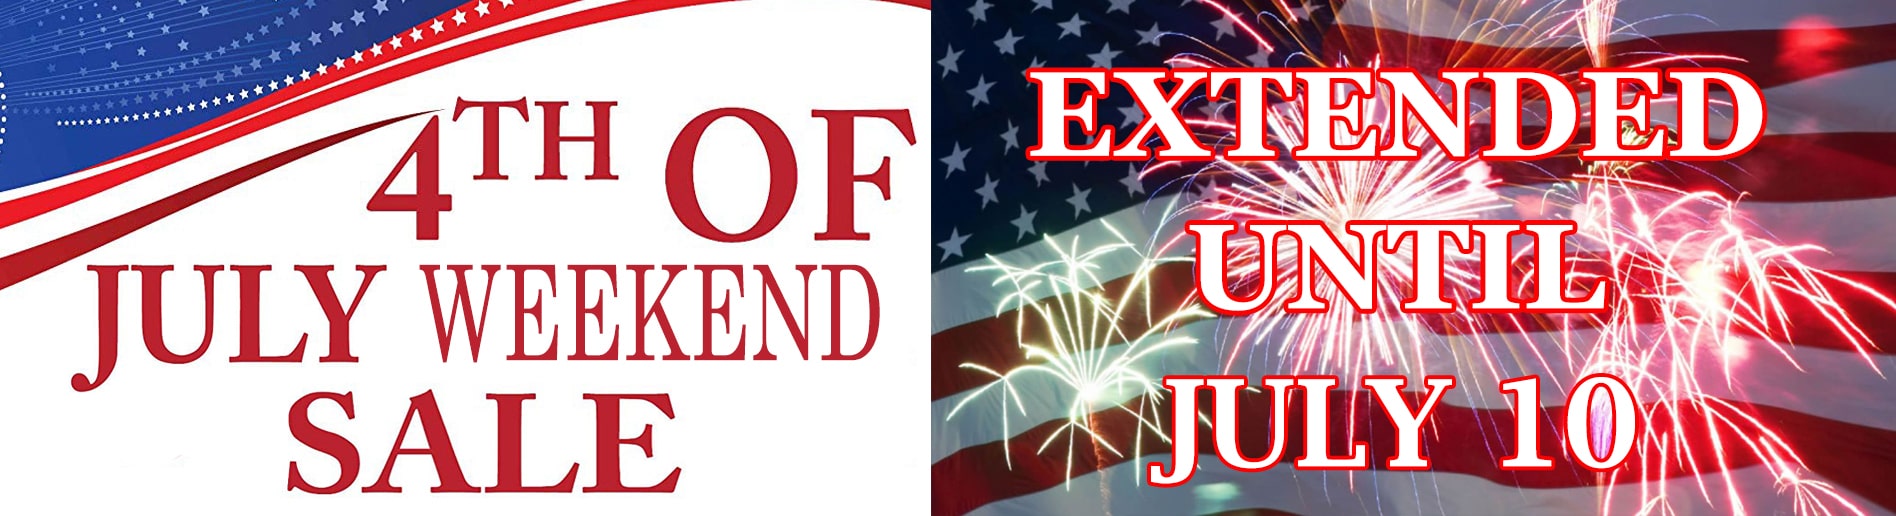 4th%20of%20july%20sale%20extended-min.jp